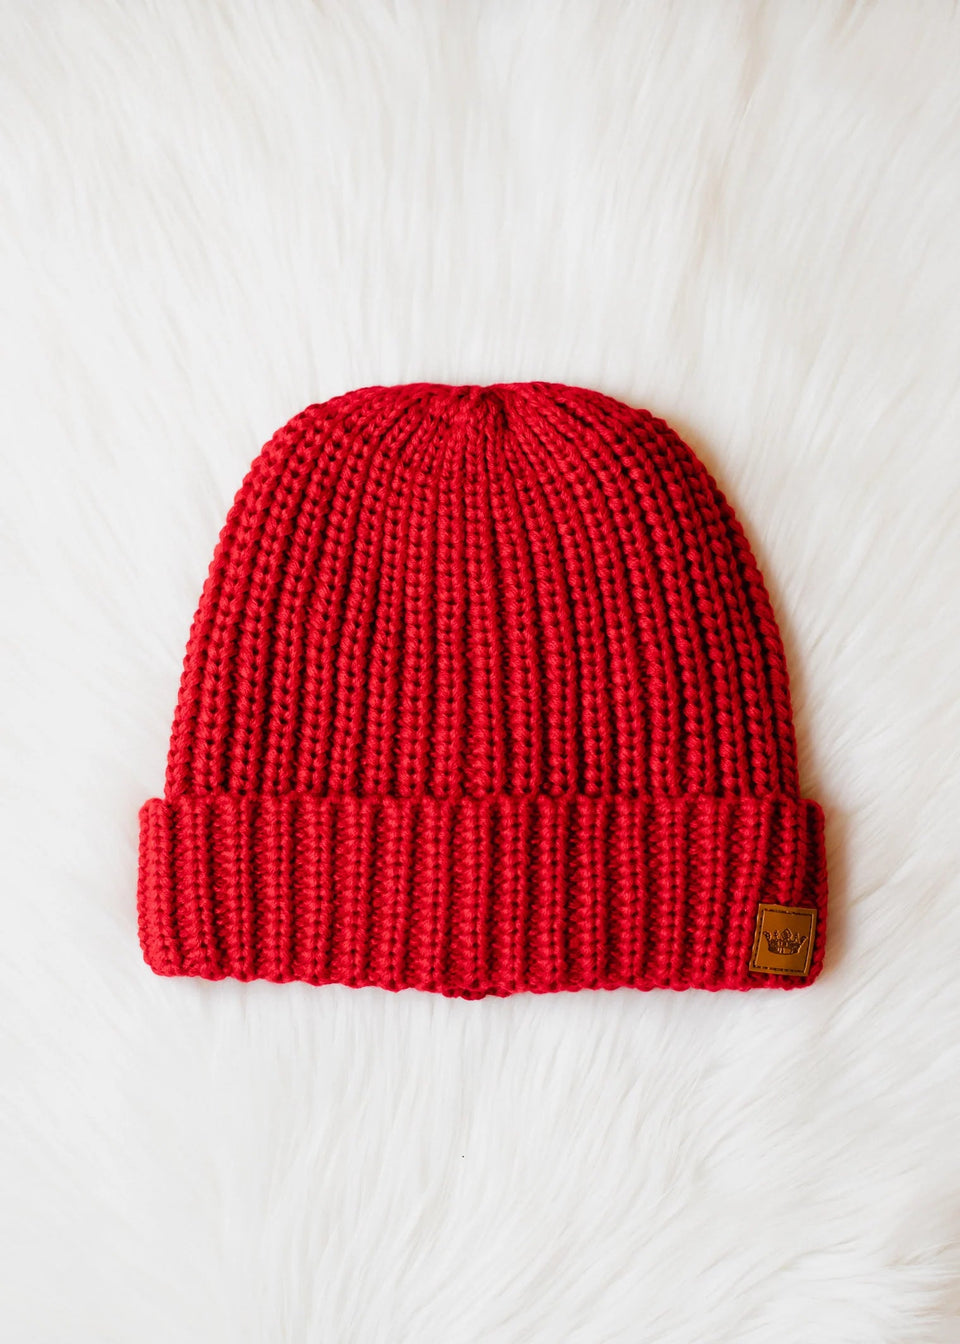 Red Knit Beanie | petite shops